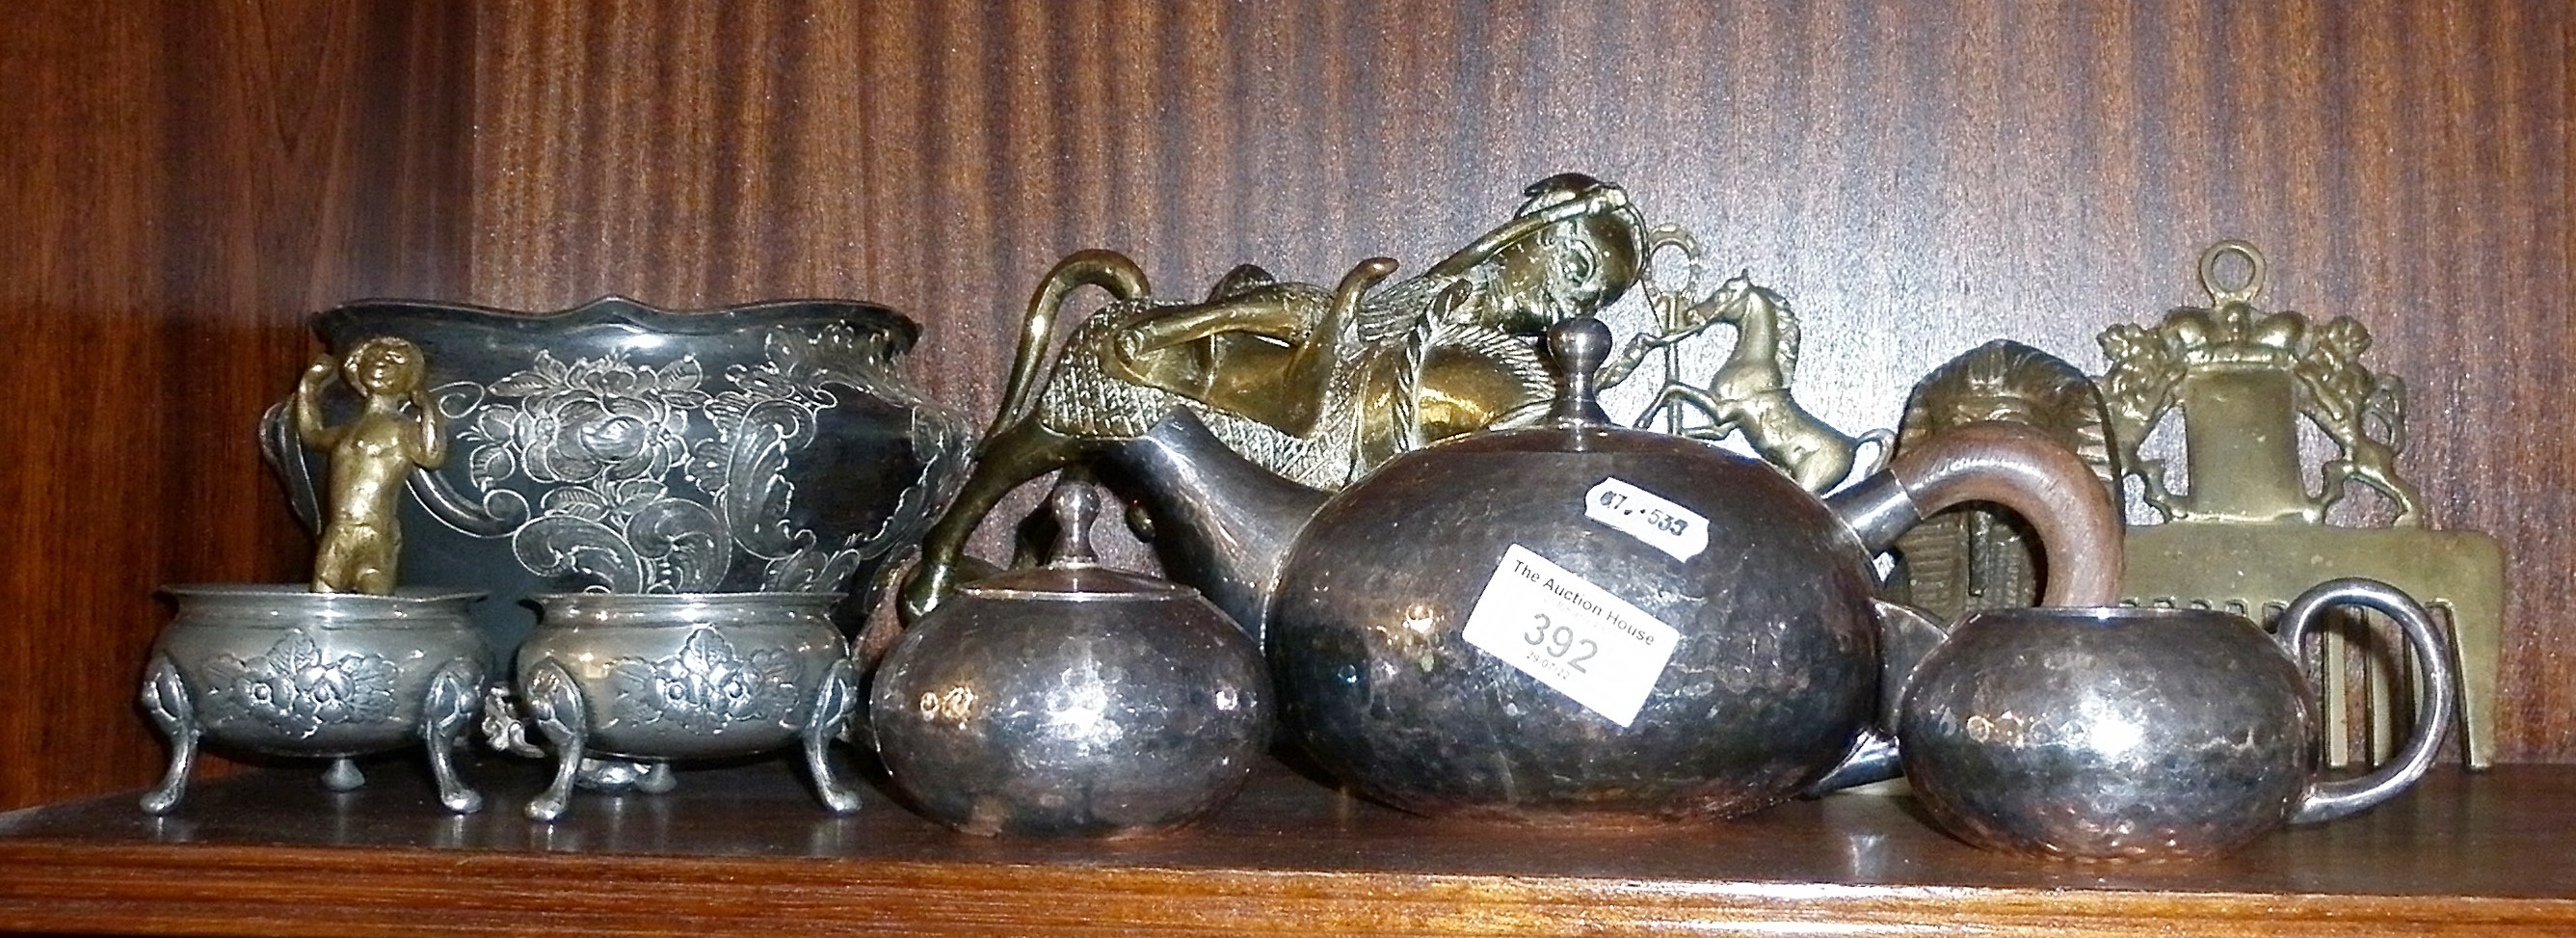 Arts & Crafts beaten pewter teaset, Benin brass horse and rider, two brass crested curry combs etc